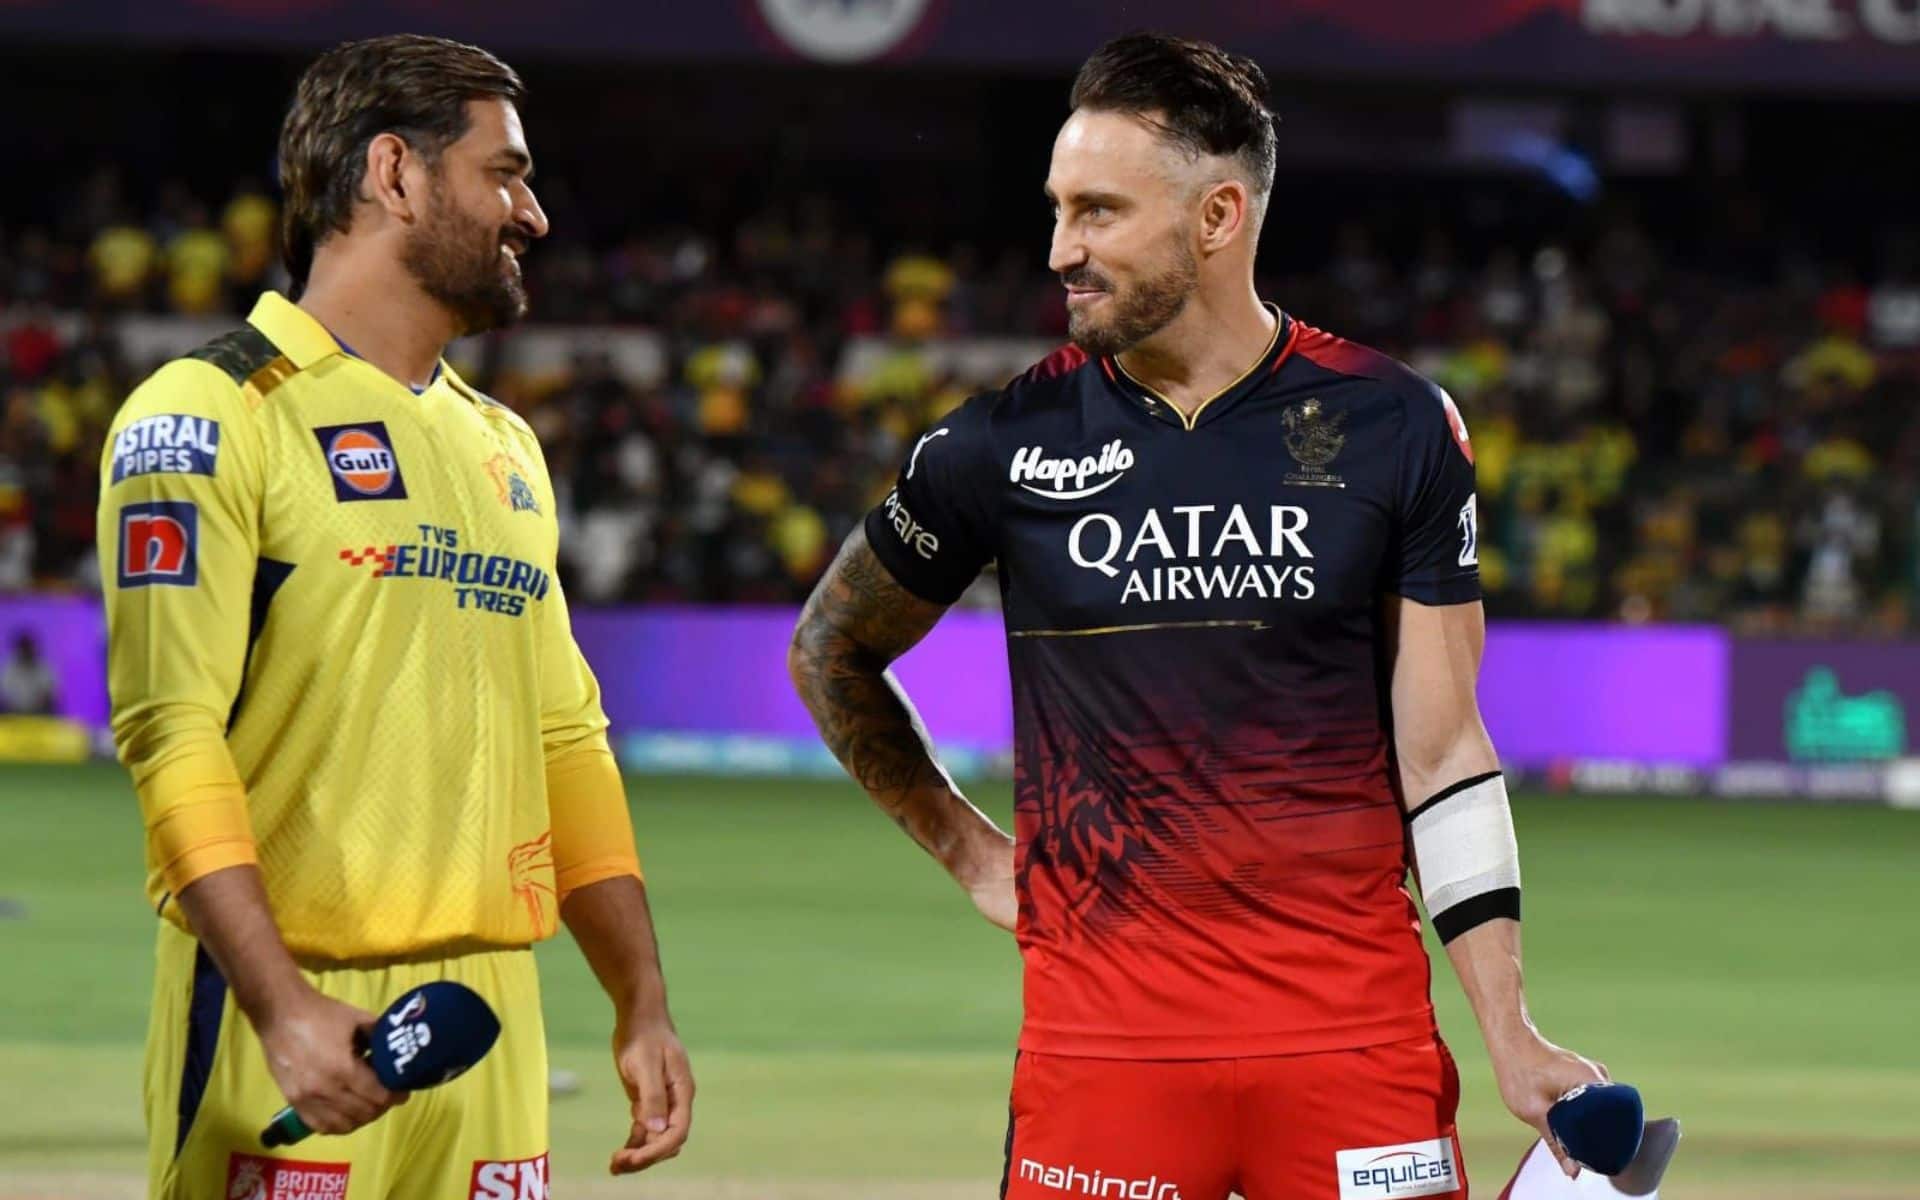 MS Dhoni and Faf du Plessis - The captains of CSK and RCB (x.com)